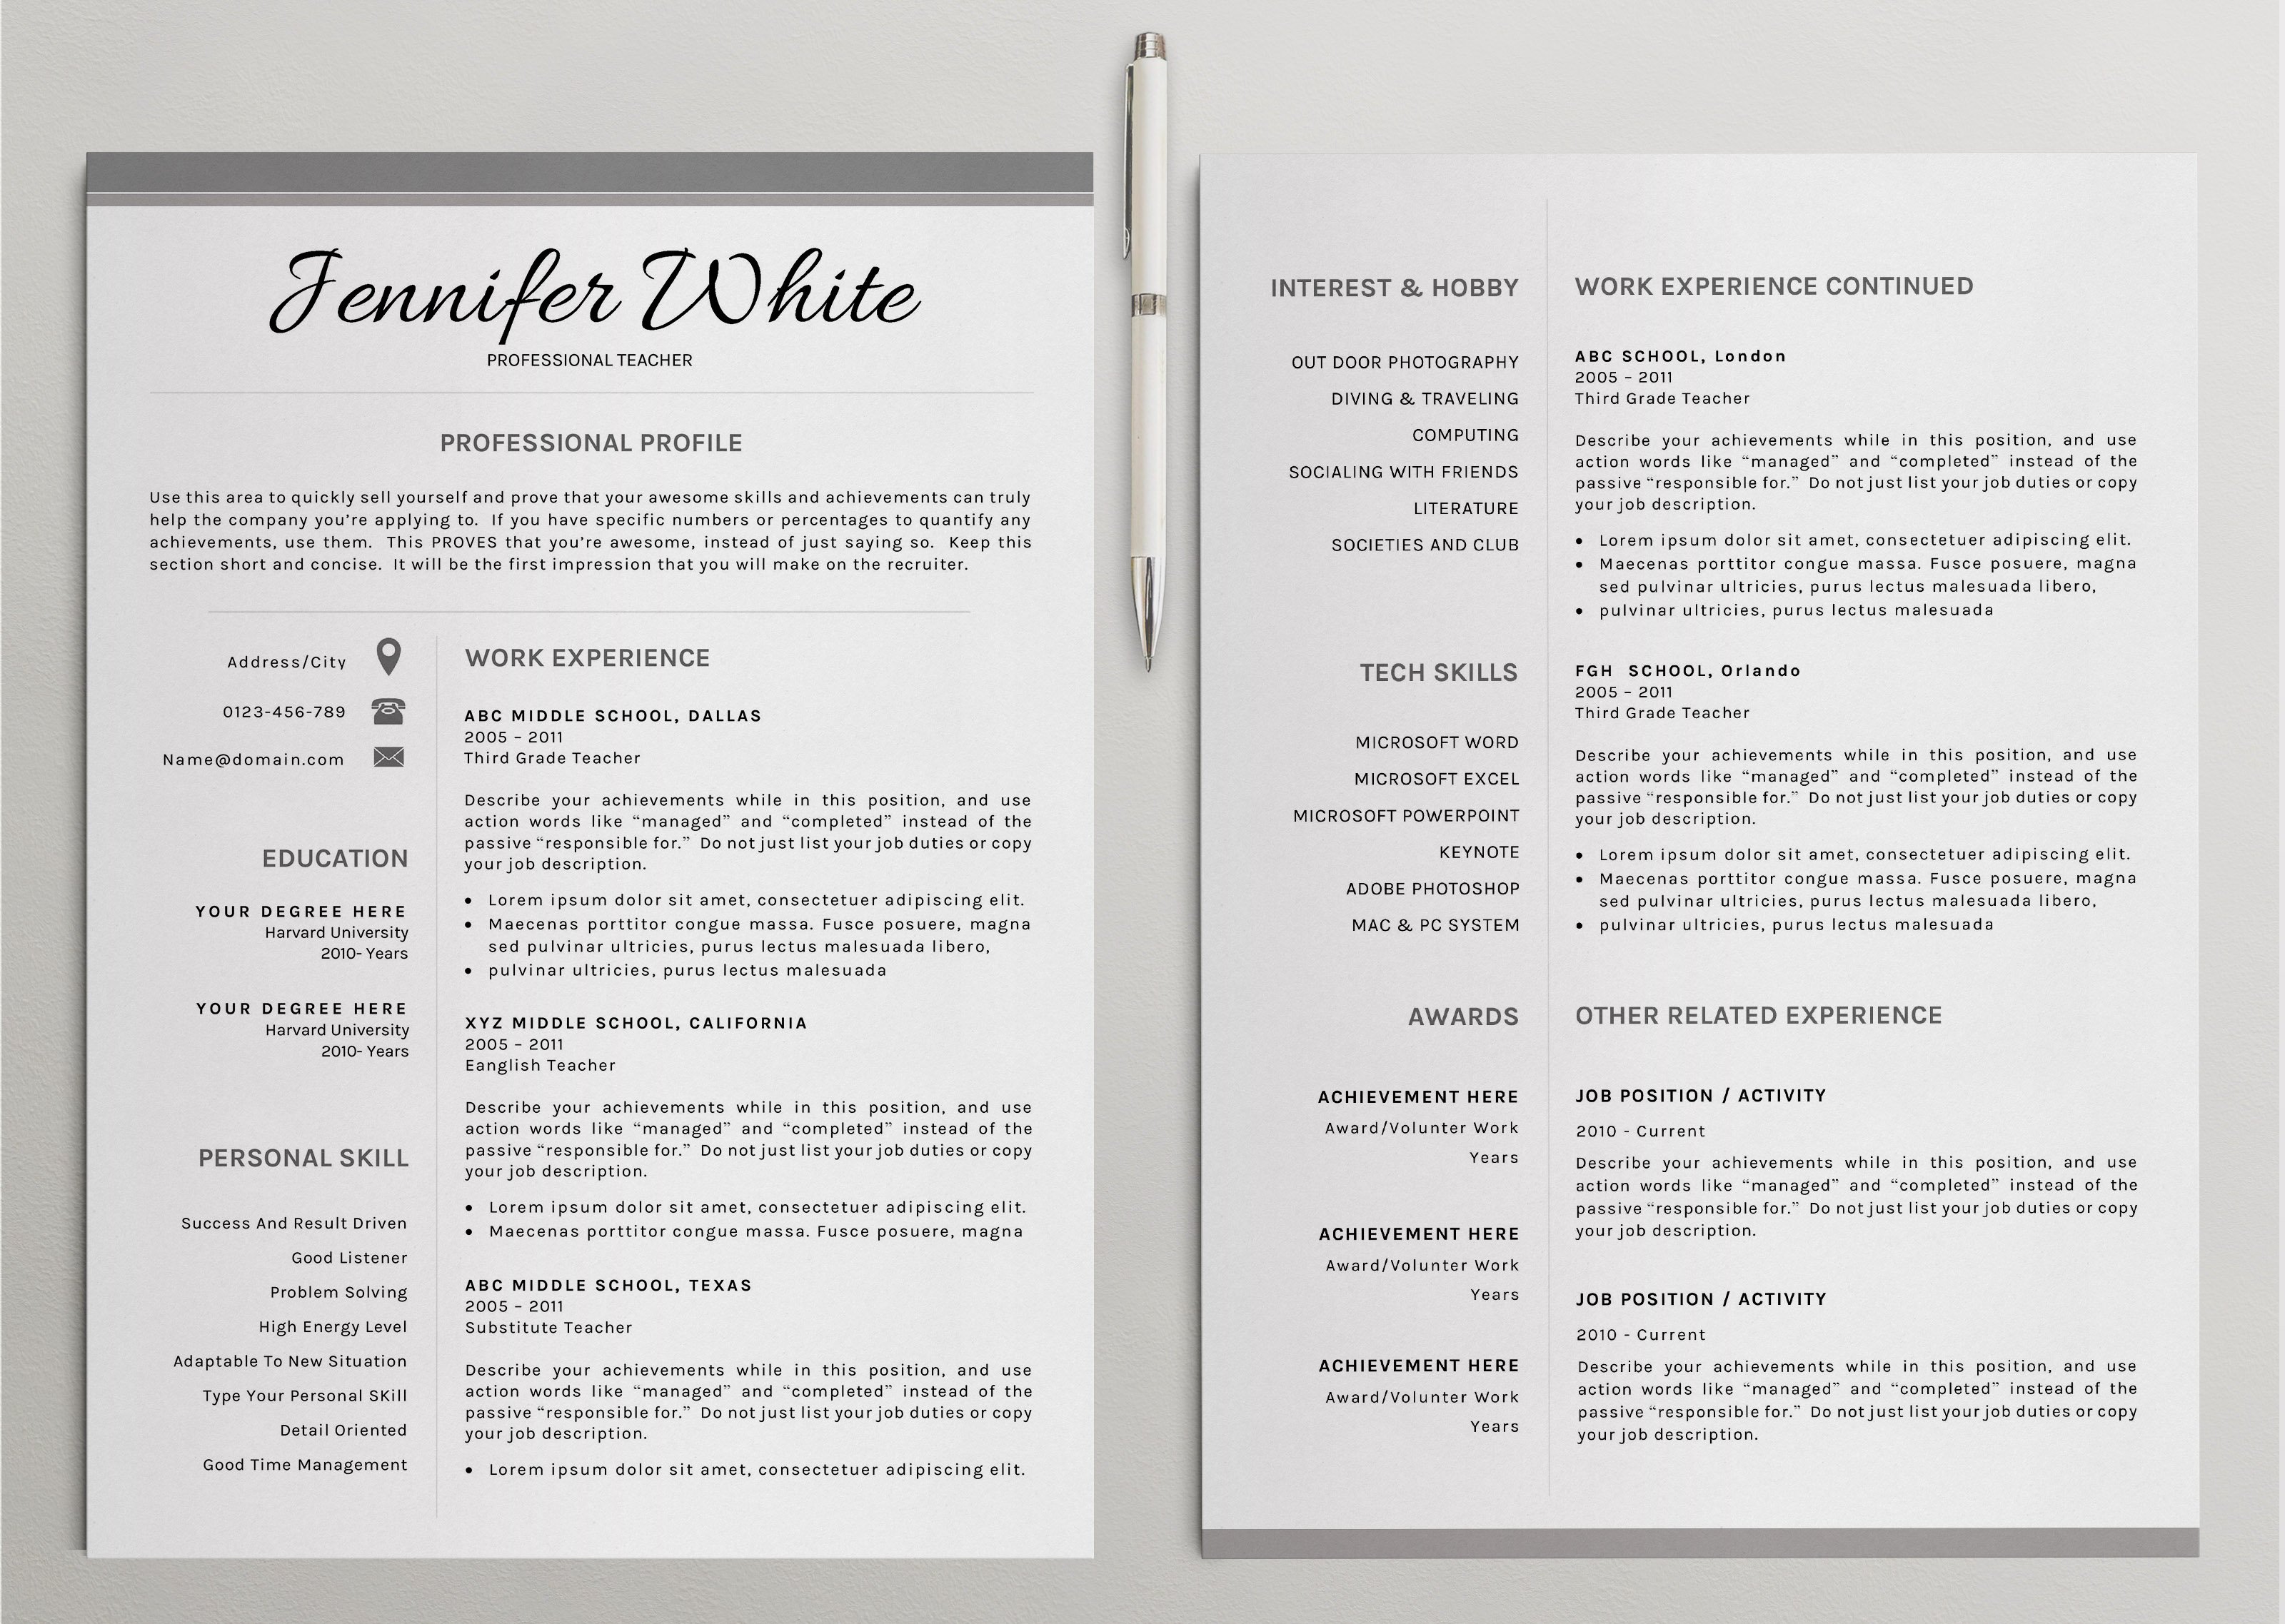 Professional Resume Templates preview image.